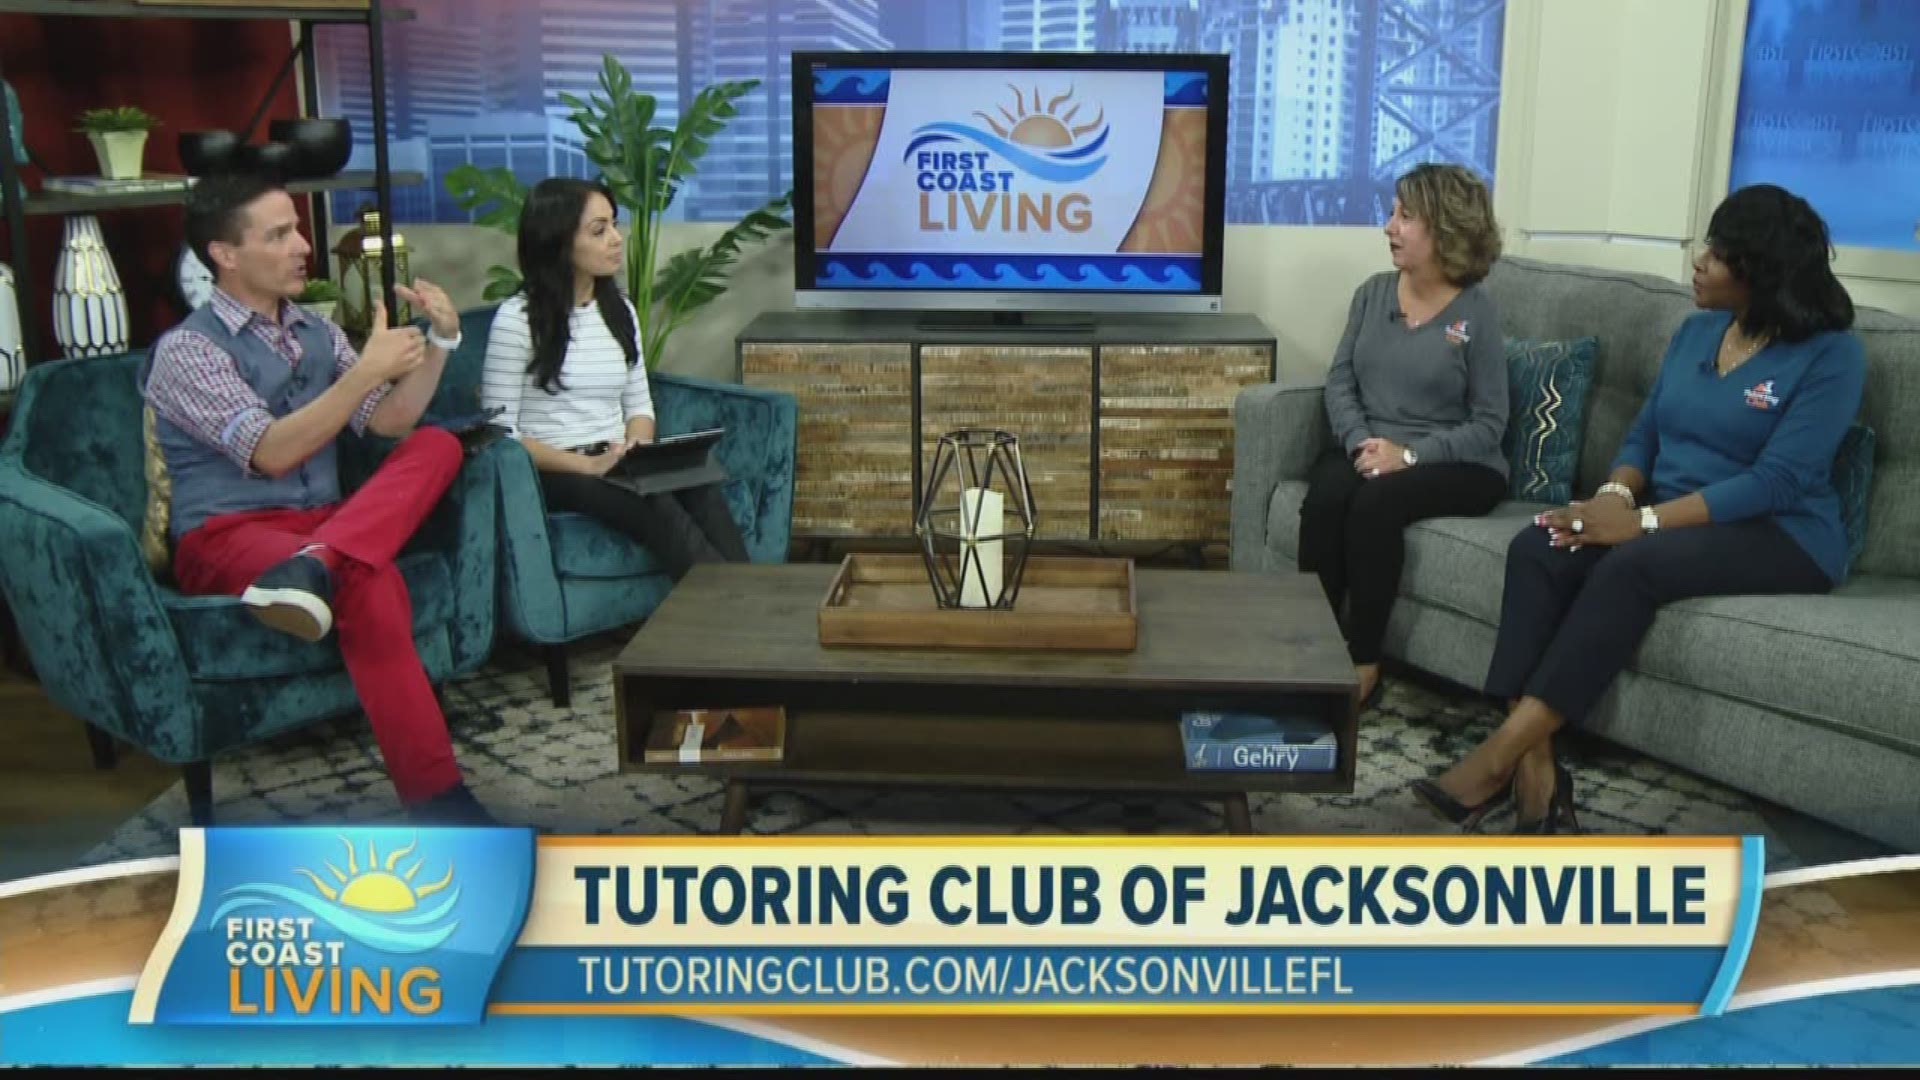 No matter what area of school your child is struggling in, the Tutoring Club can help.